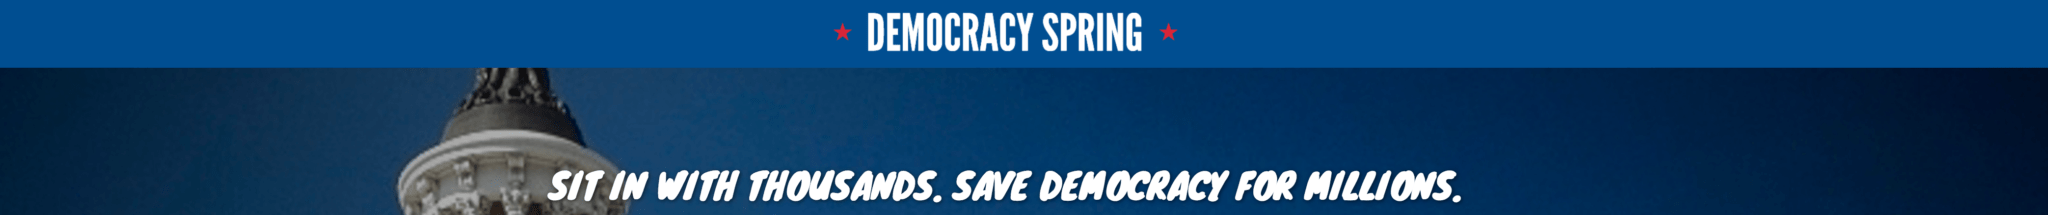 UFPJ Endorses “Democracy Spring” (April 11-16) – Mass Nonviolent Action for Free & Fair Elections